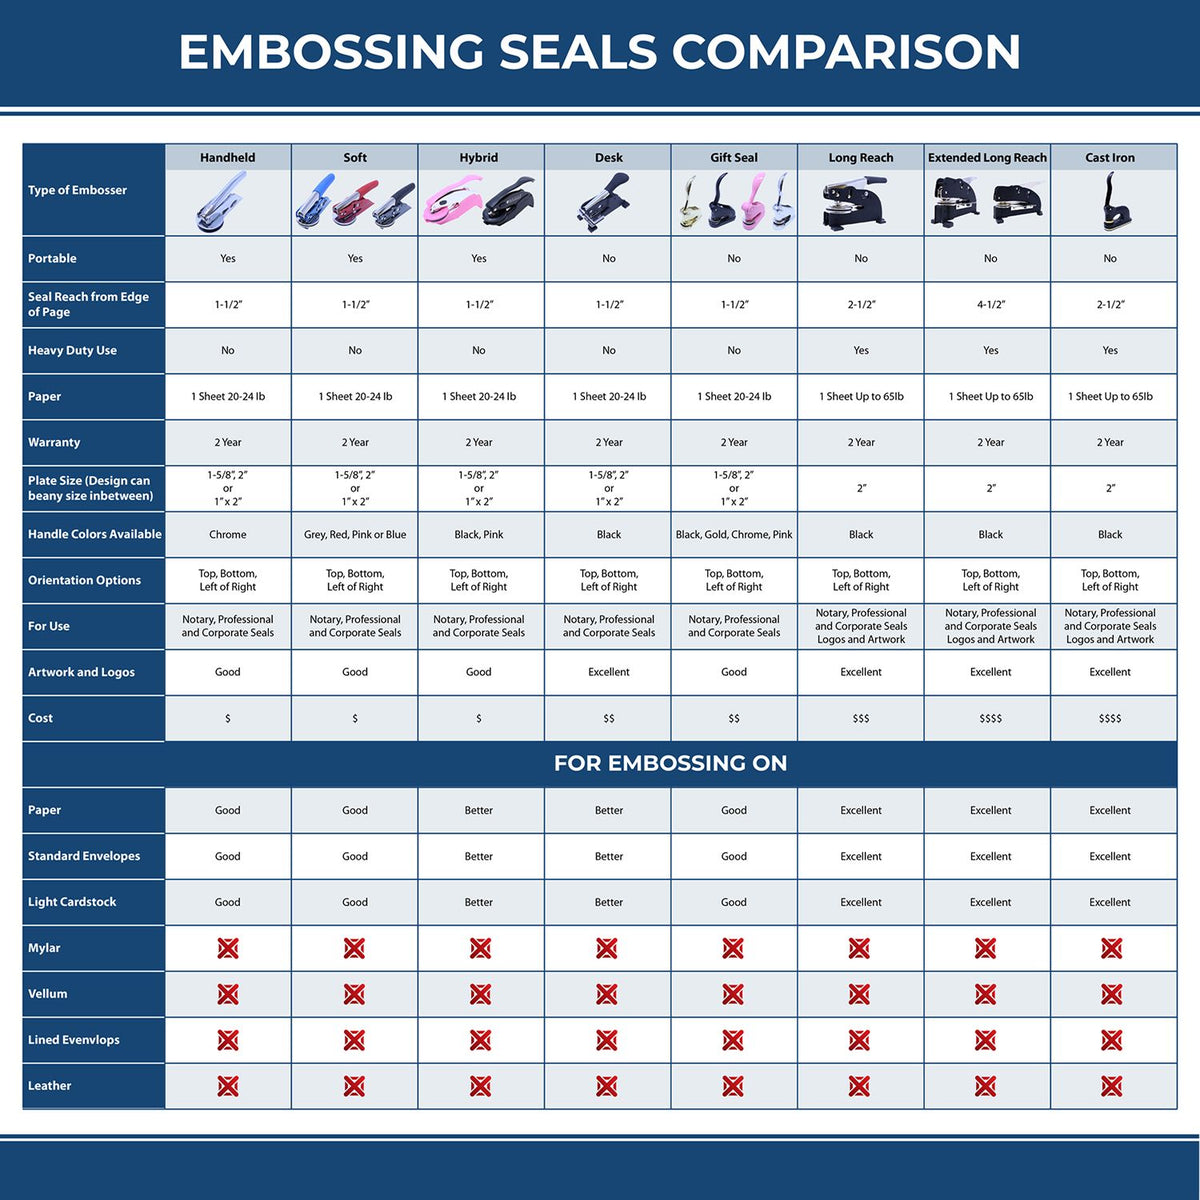 A comparison chart for the different types of mount models available for the Soft Michigan Professional Engineer Seal.